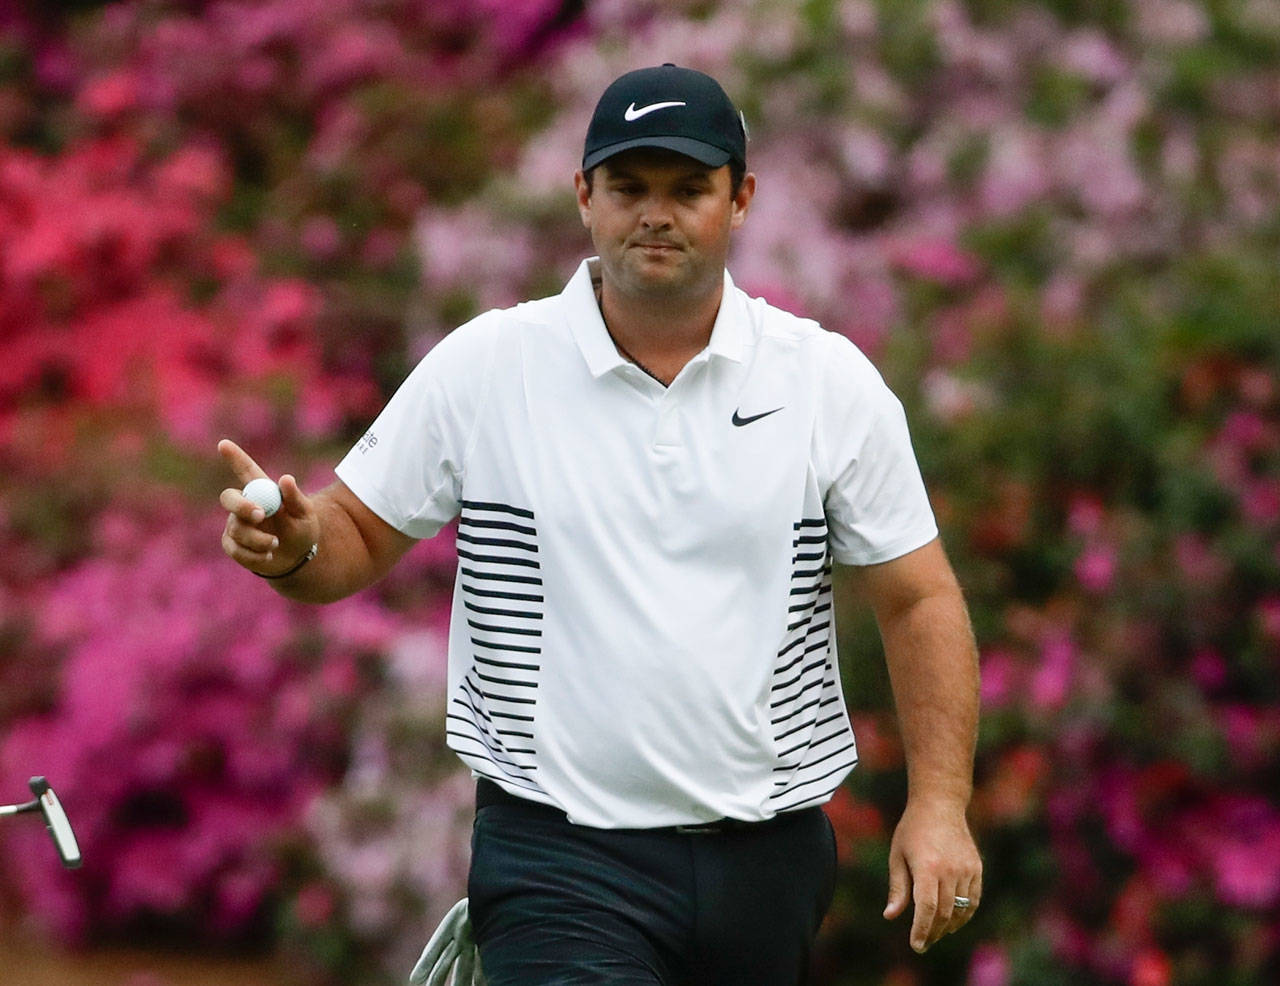 Patrick Reed reacts after making a birdie putt on the 13th hole during the second round at the Masters on April 6, 2018, in Augusta, Ga. (AP Photo/Chris Carlson)